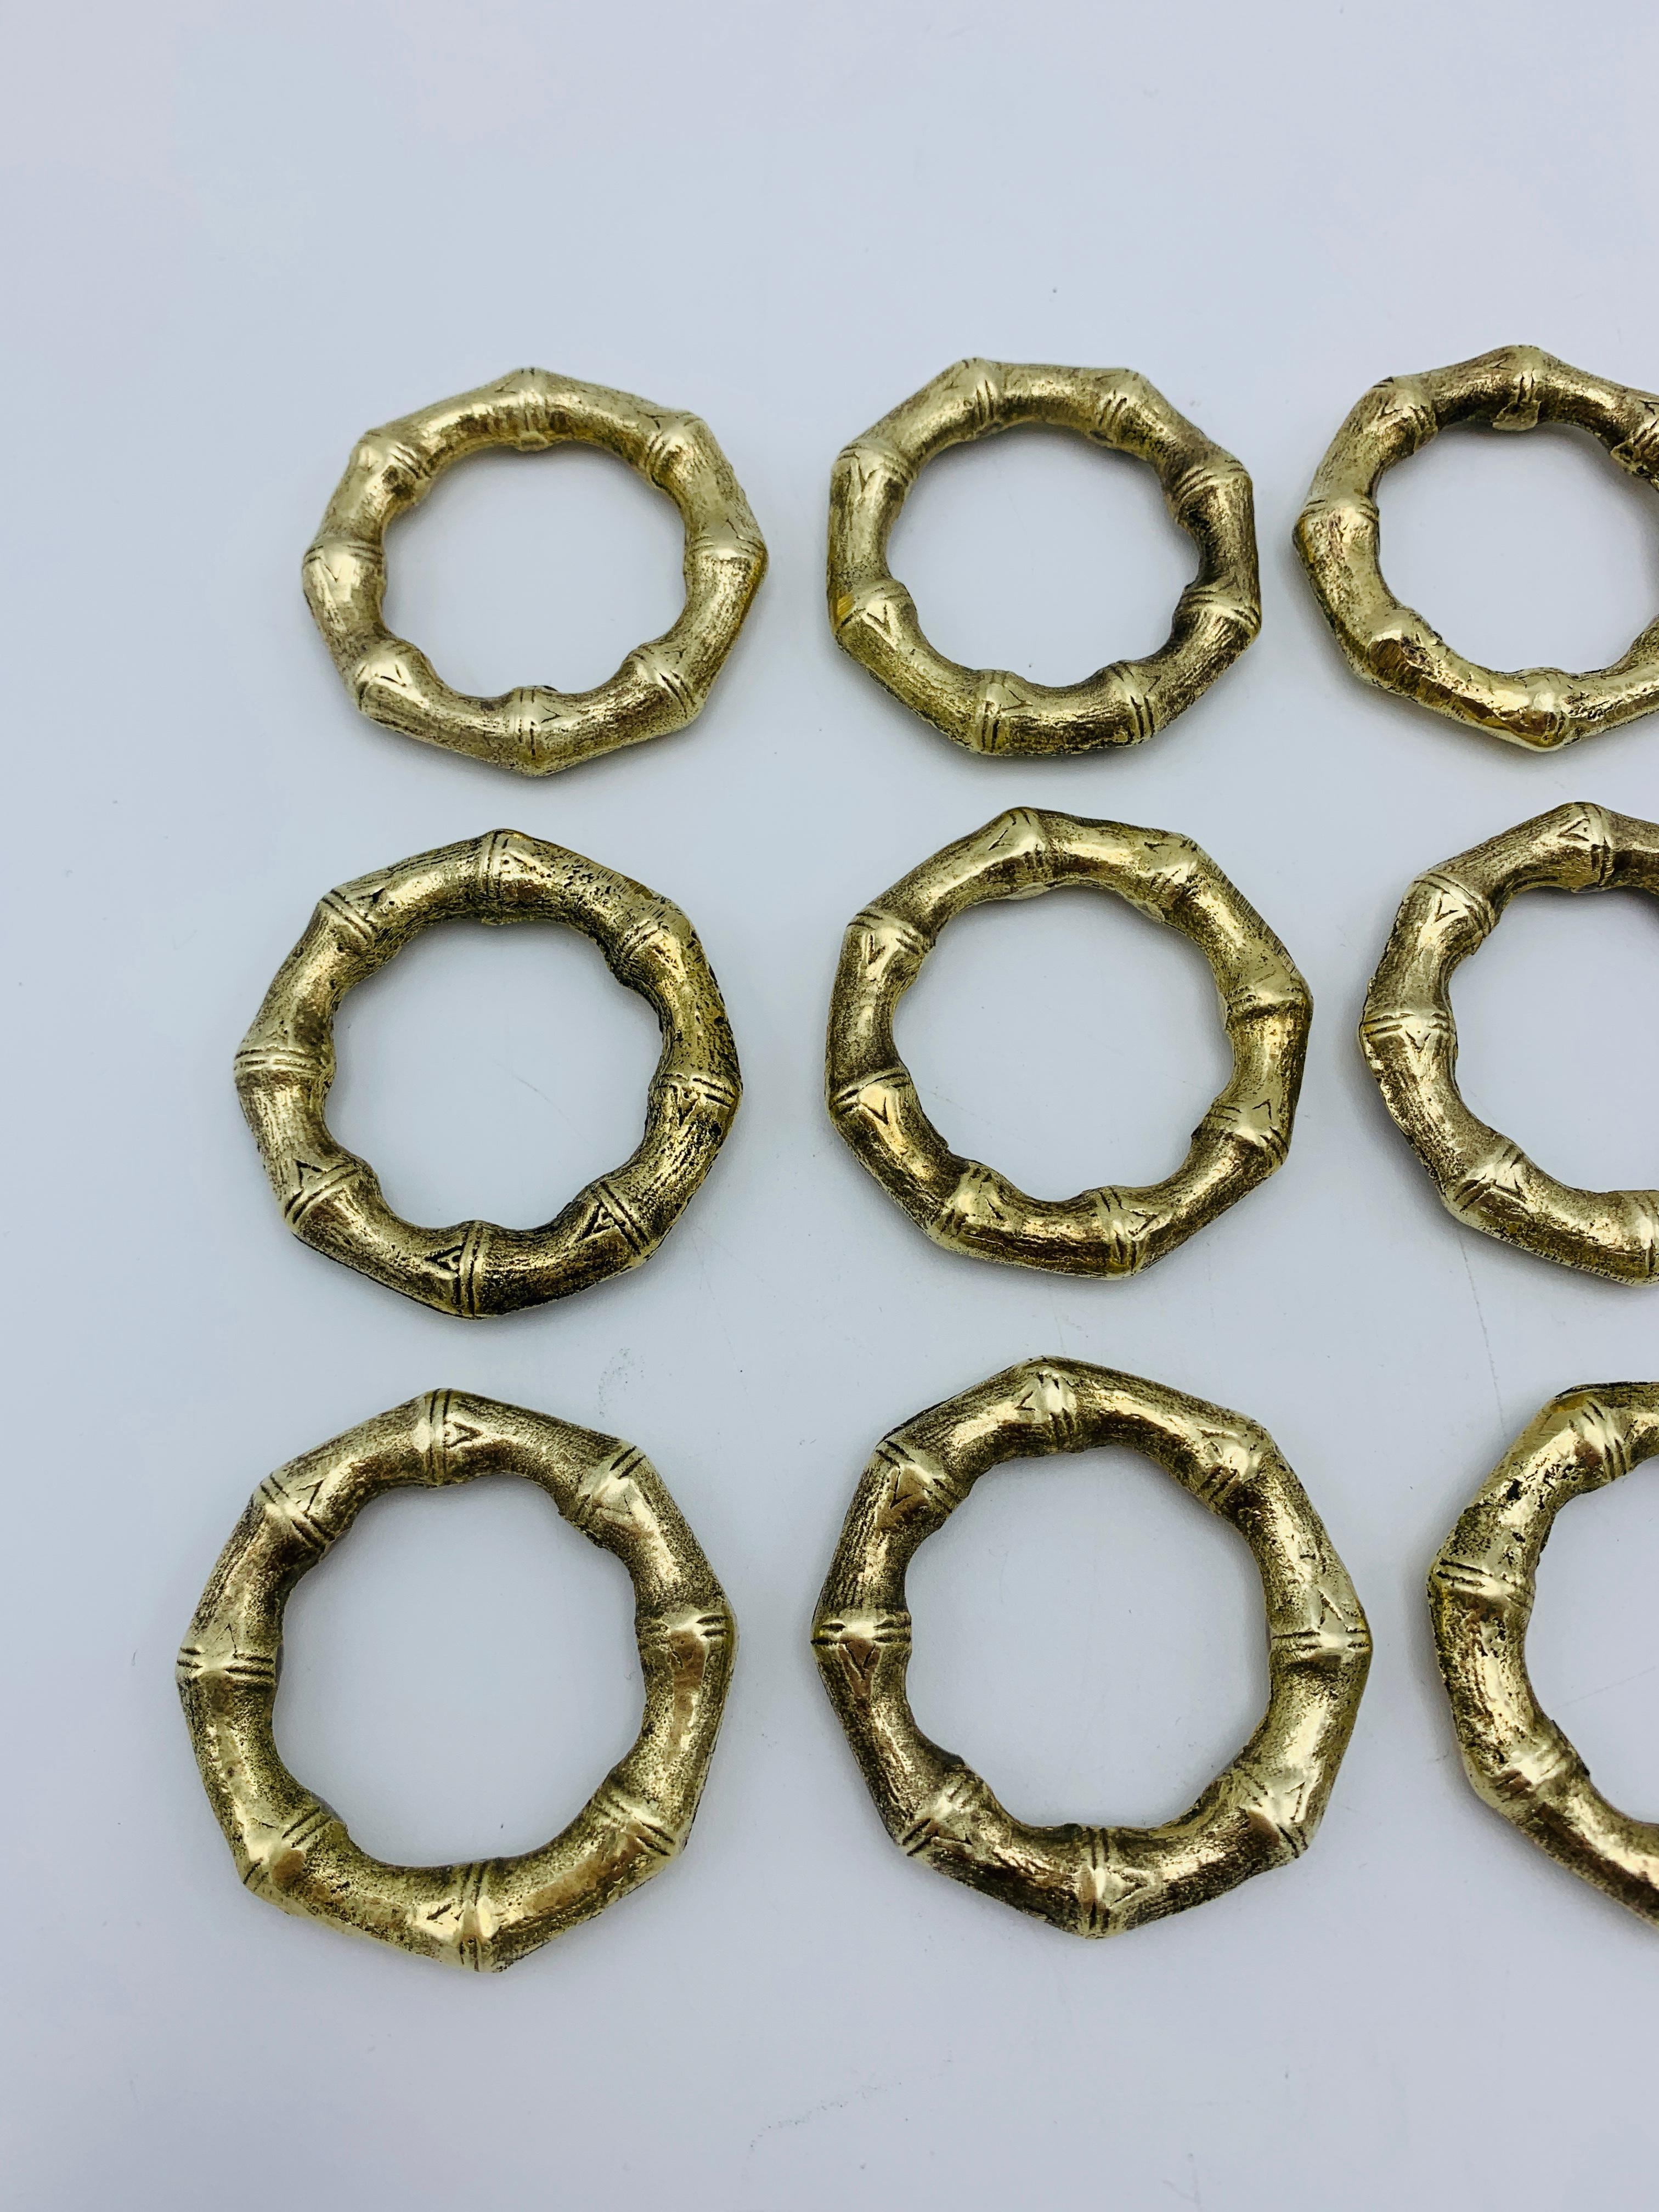 Hollywood Regency 1970s Faux Bamboo Brass Napkin Rings, Set of 12